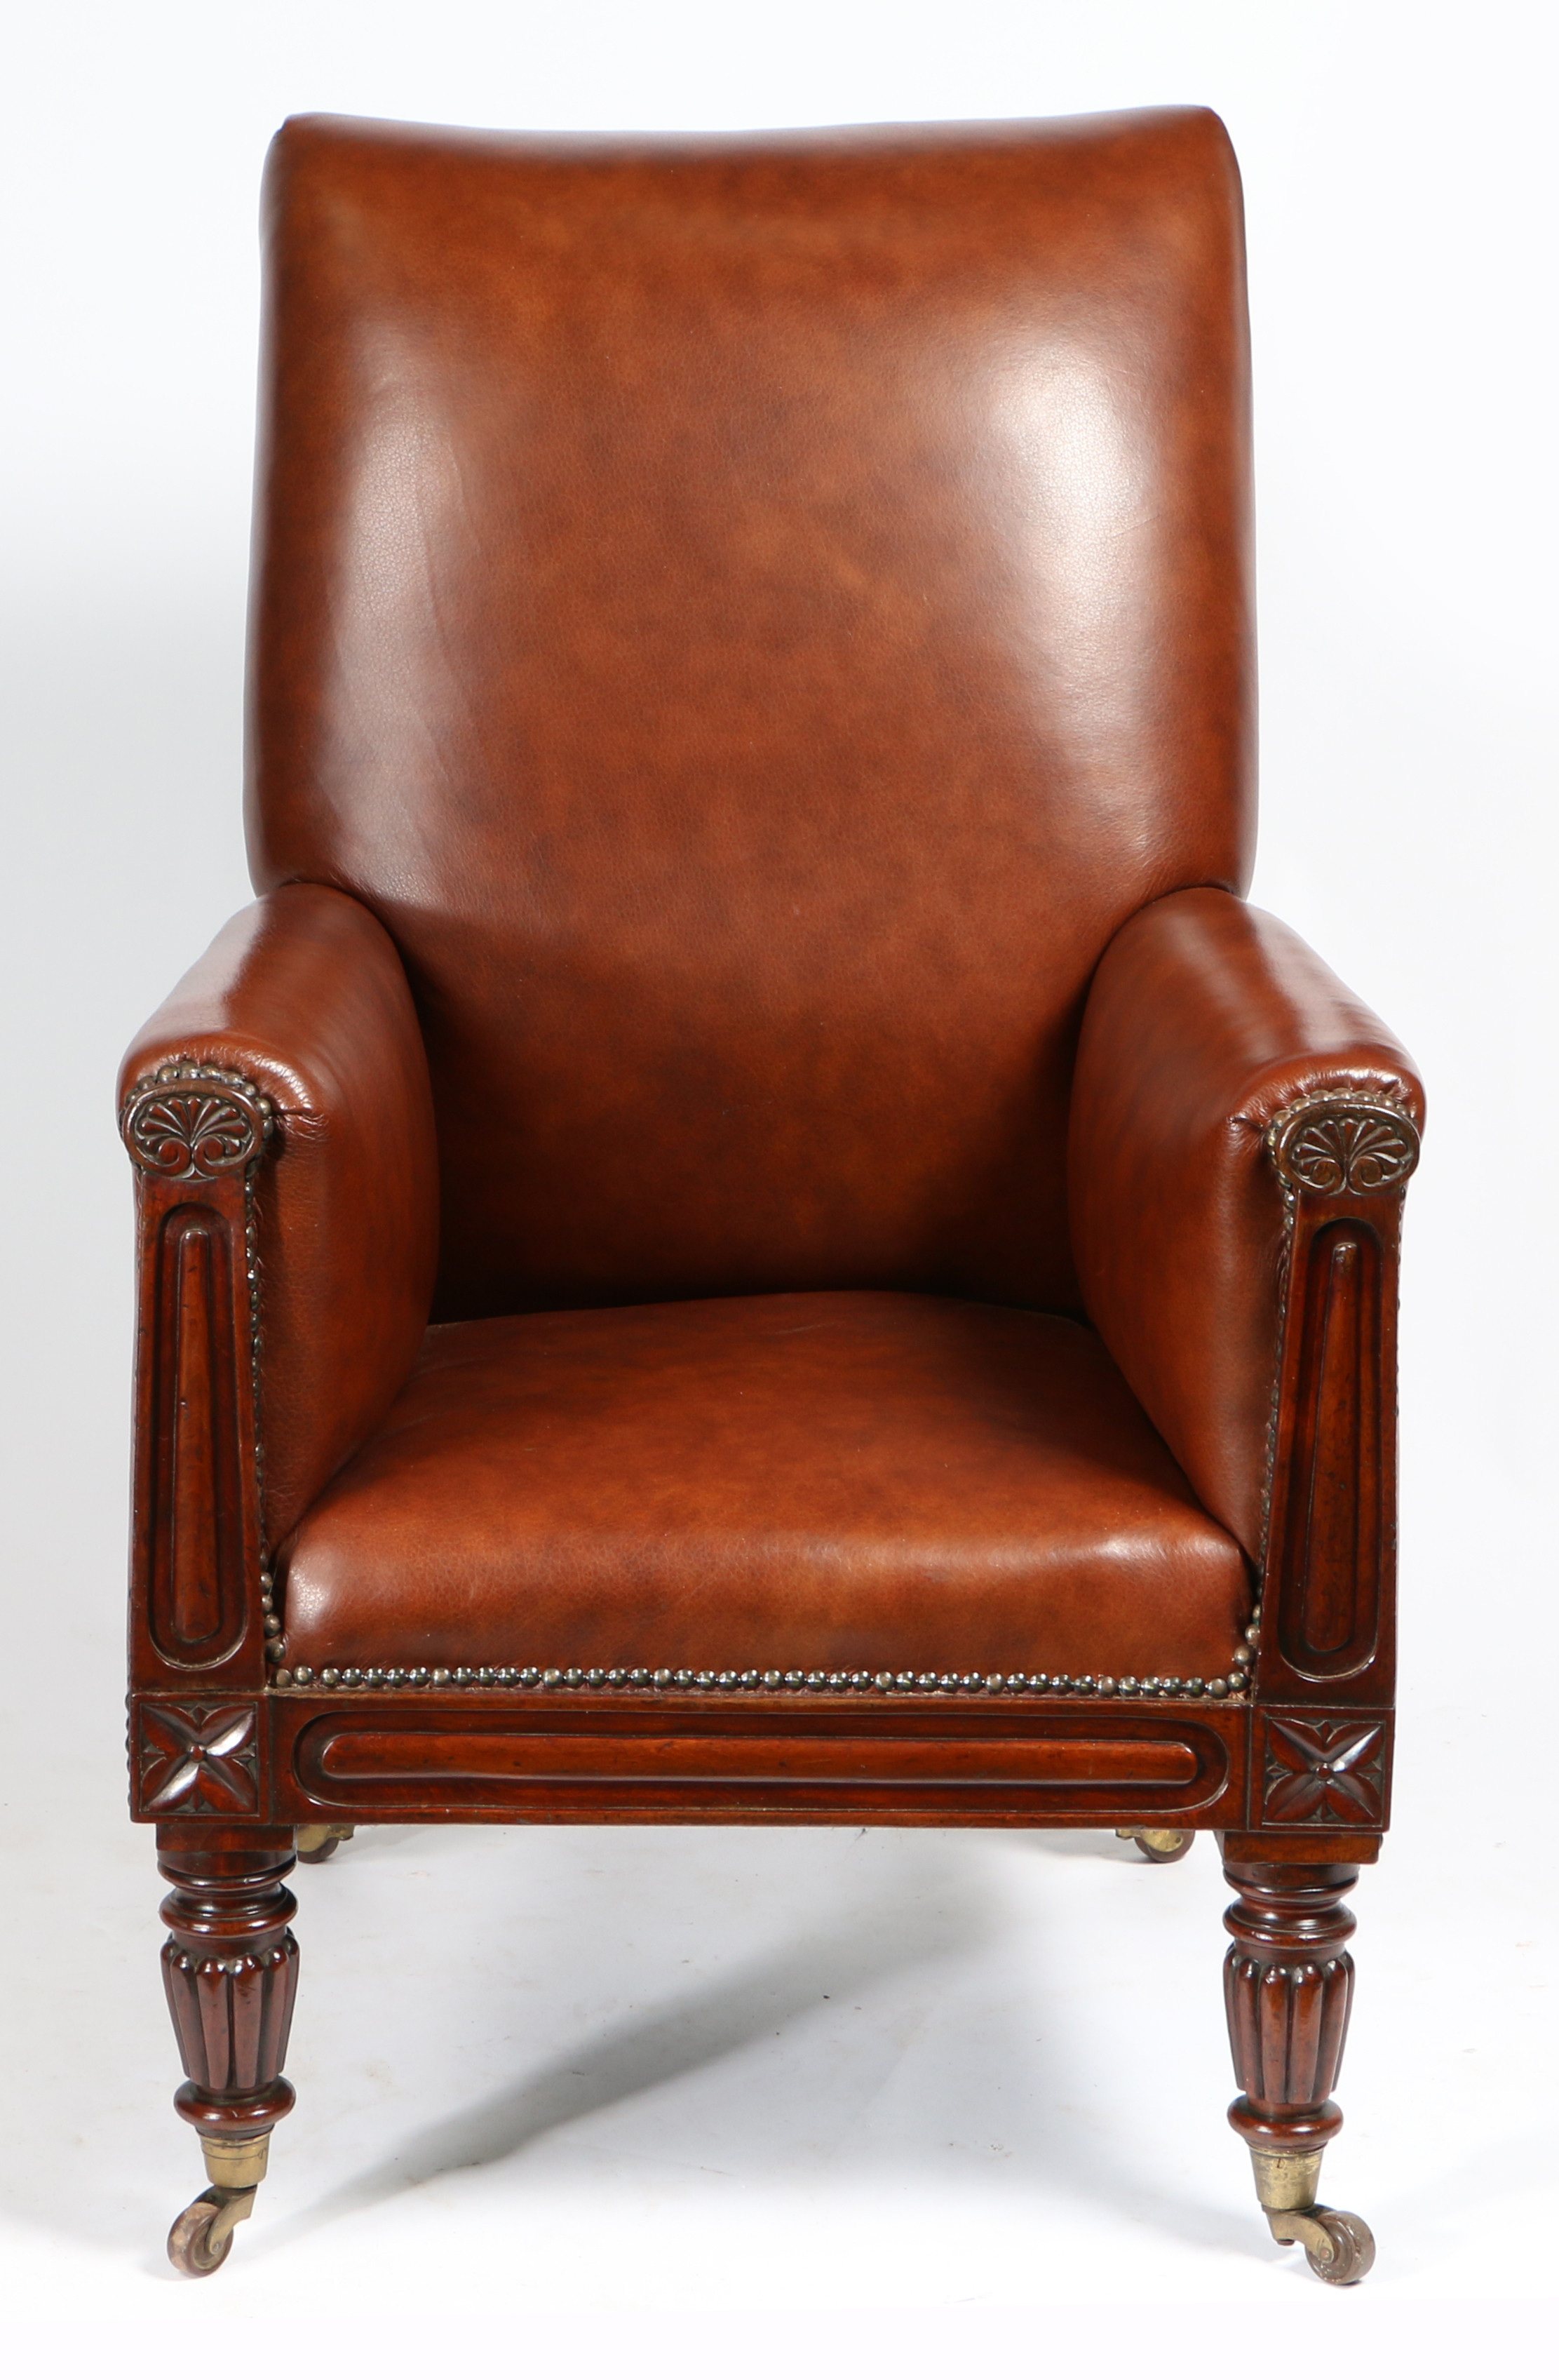 A 19TH CENTURY LEATHER UPHOLSTERED ARMCHAIR. - Image 3 of 4